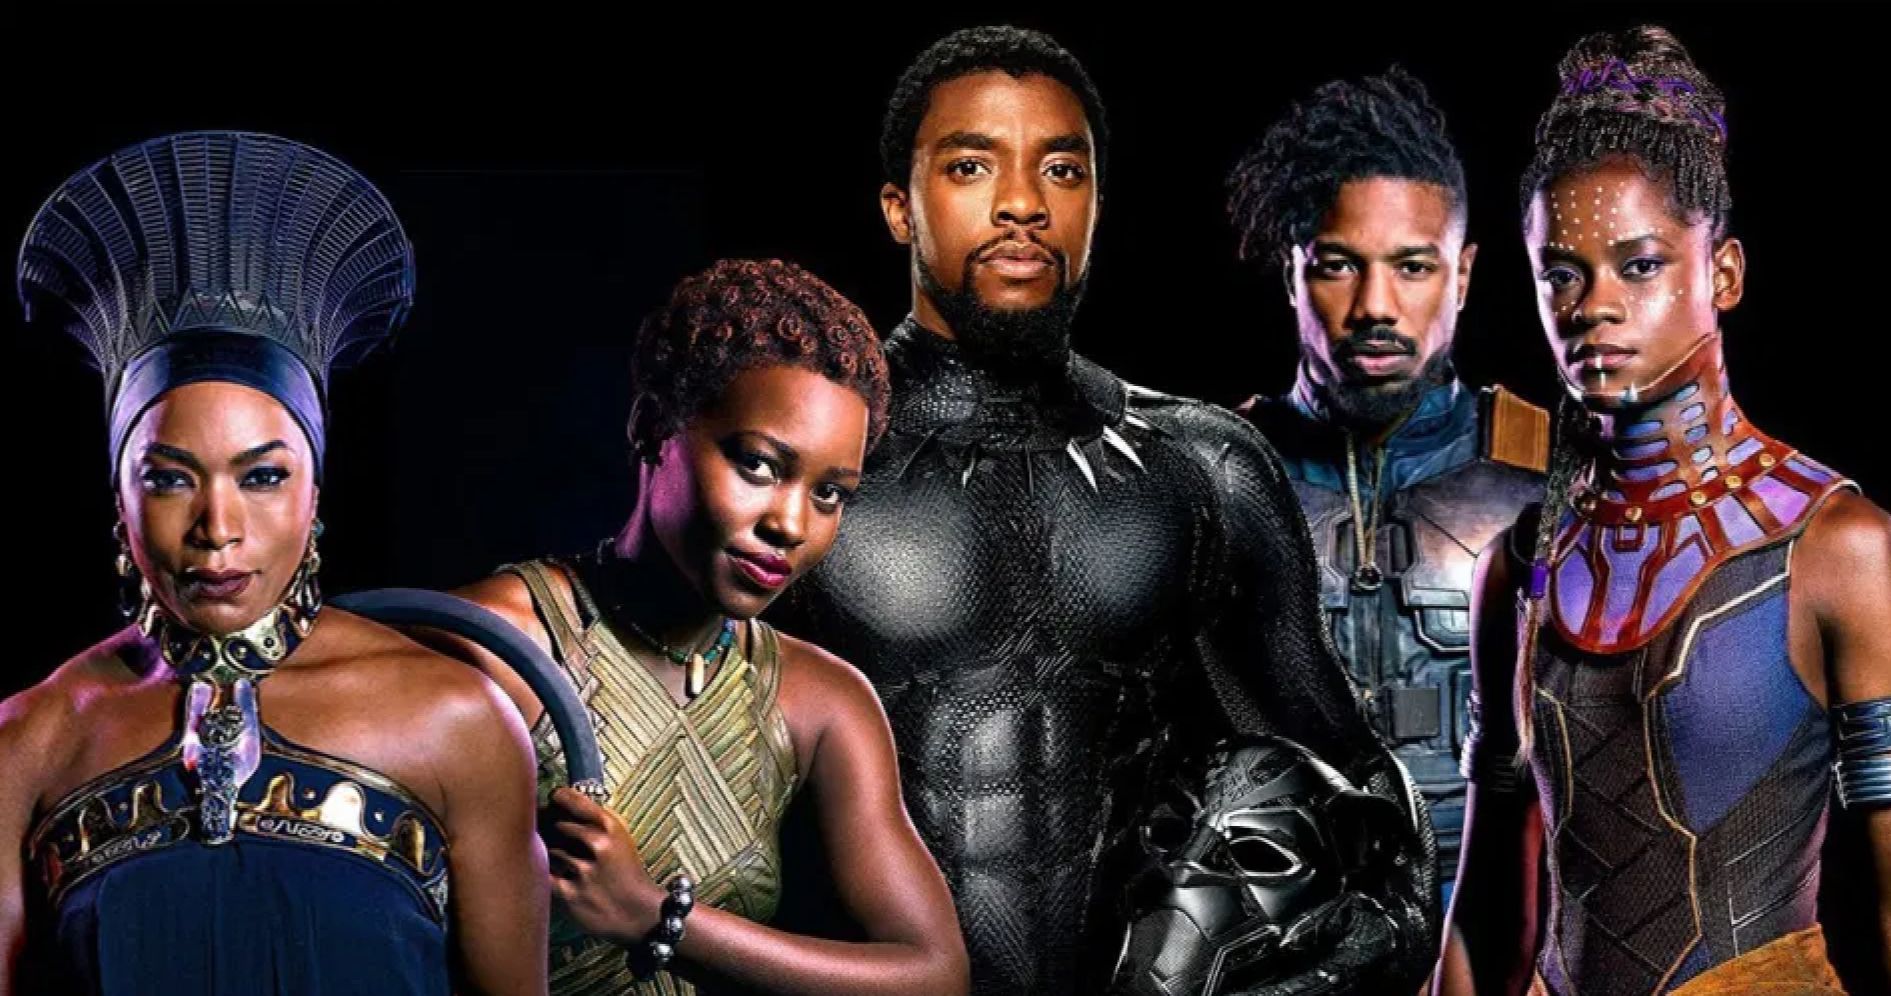 One Black Panther 2 Star Is Open to Bringing Chadwick Boseman Back with CGI